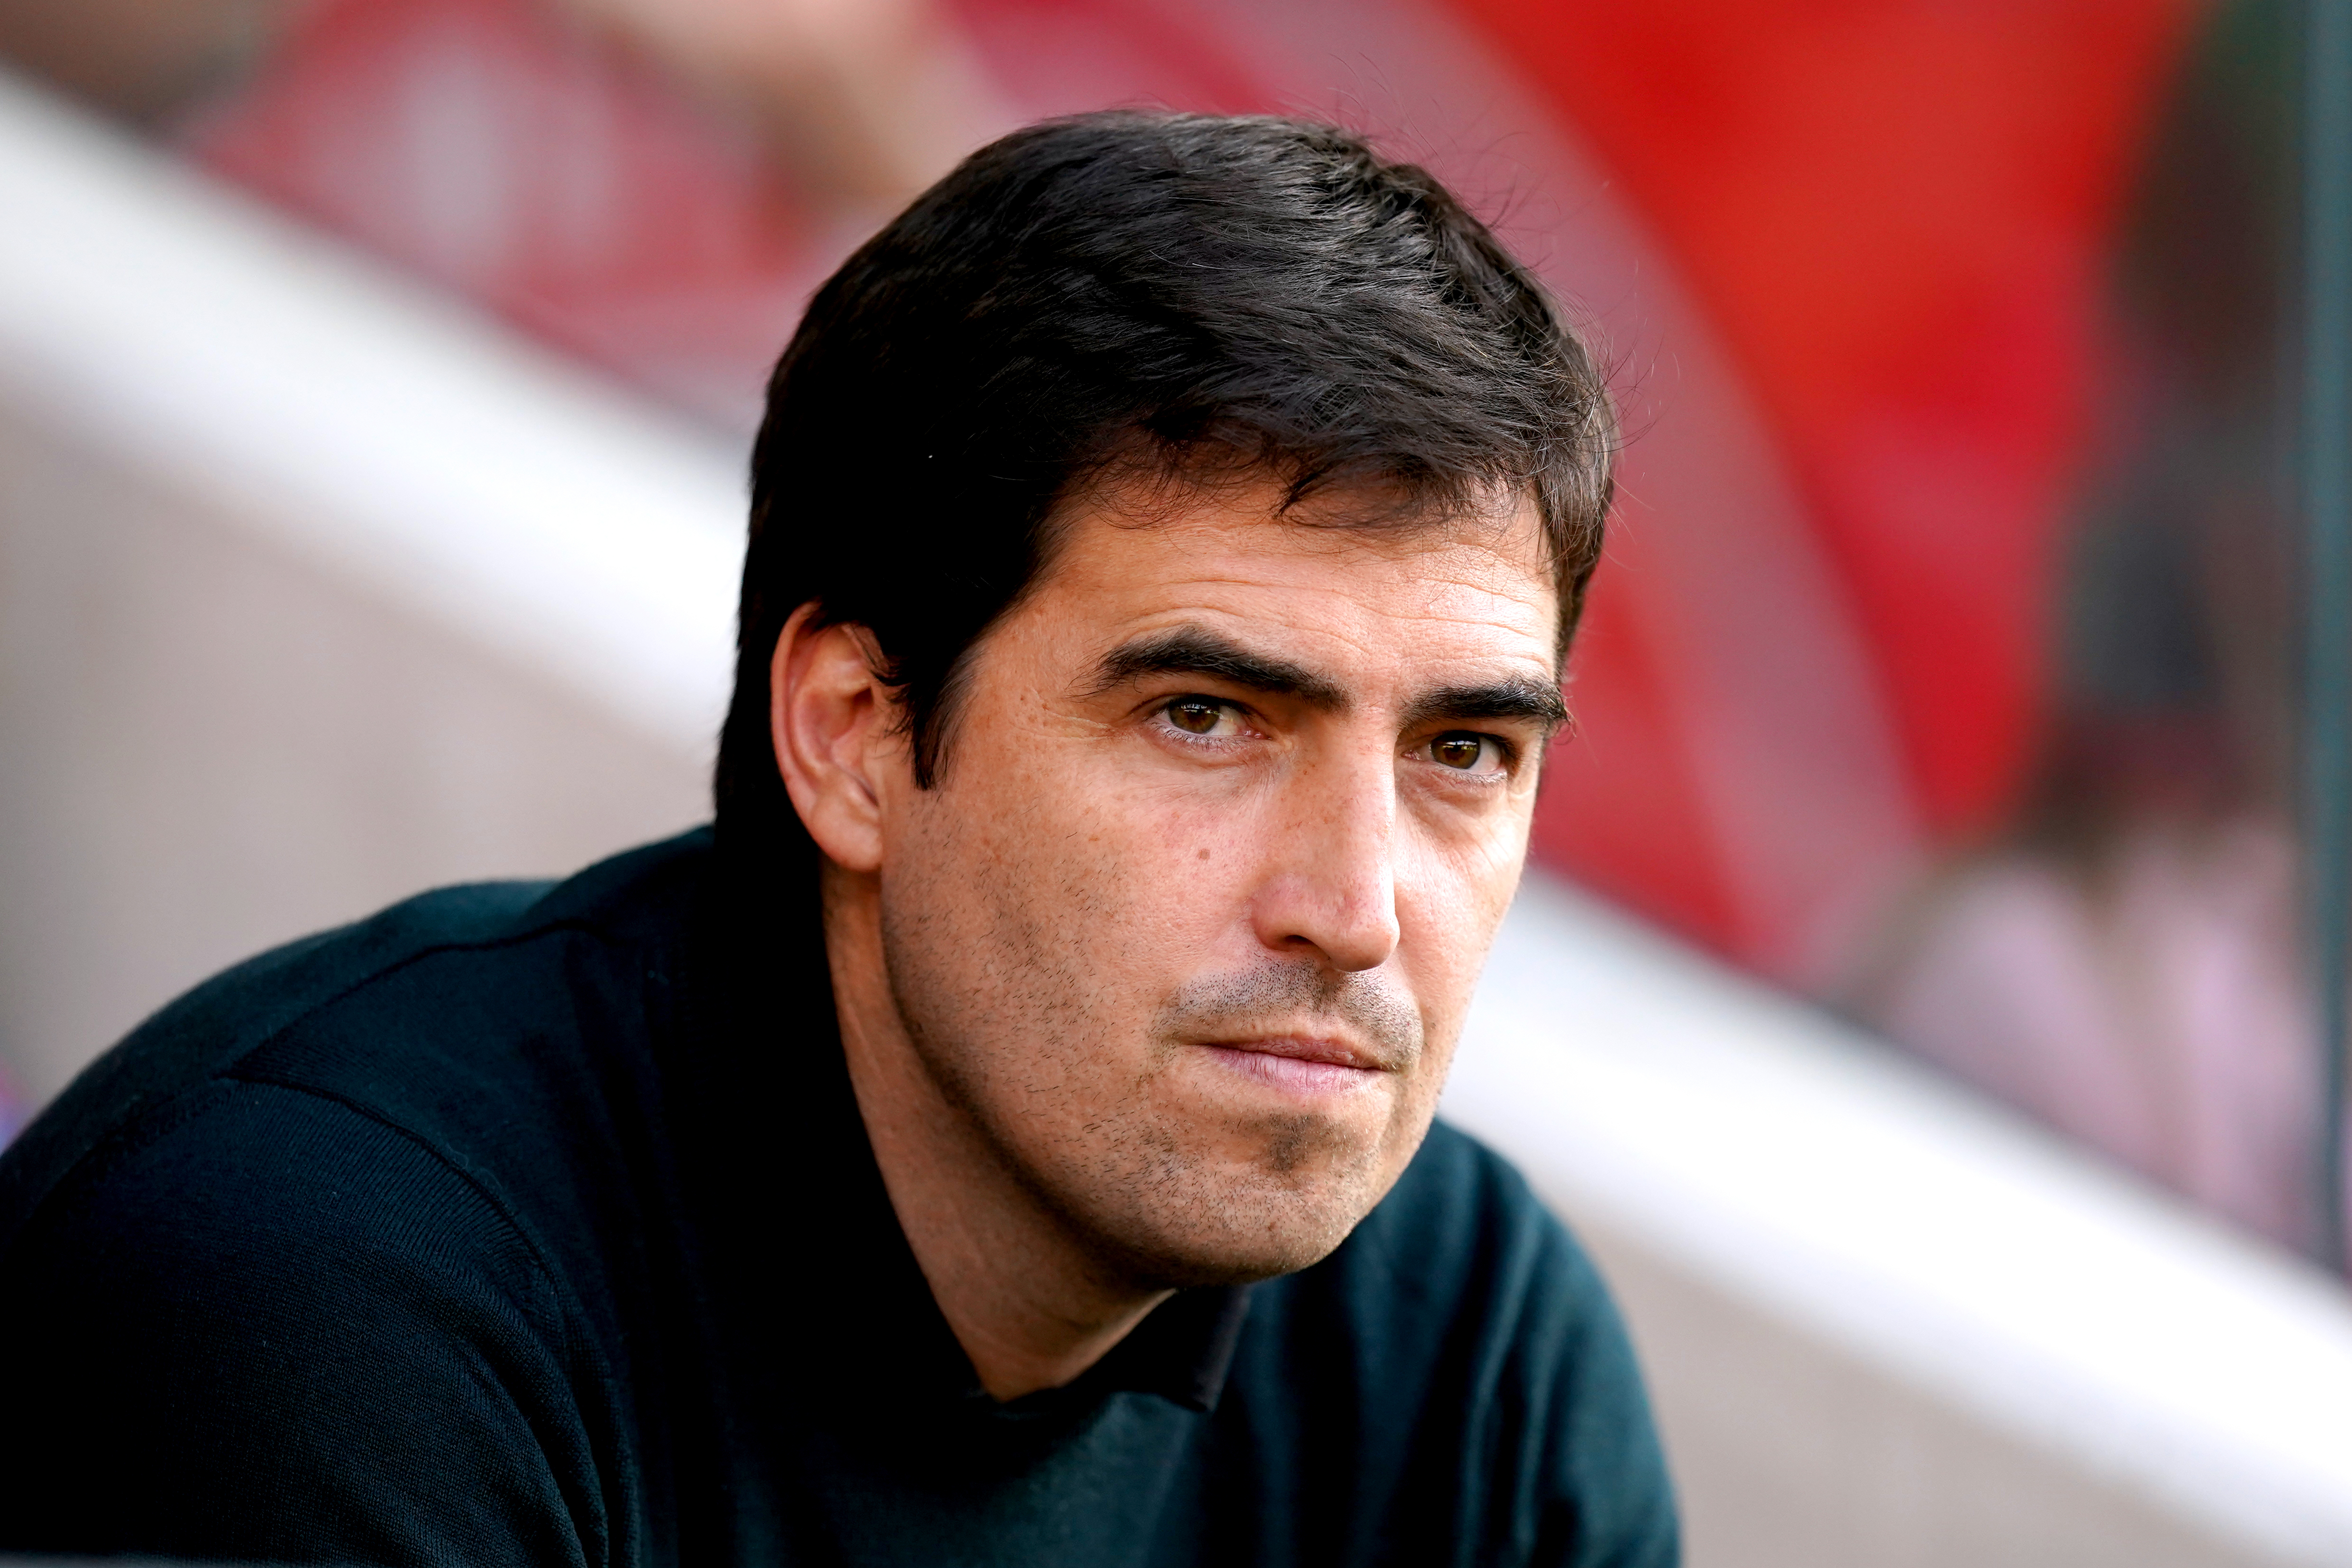 Bournemouth manager Andoni Iraola played in the same youth team as Arteta